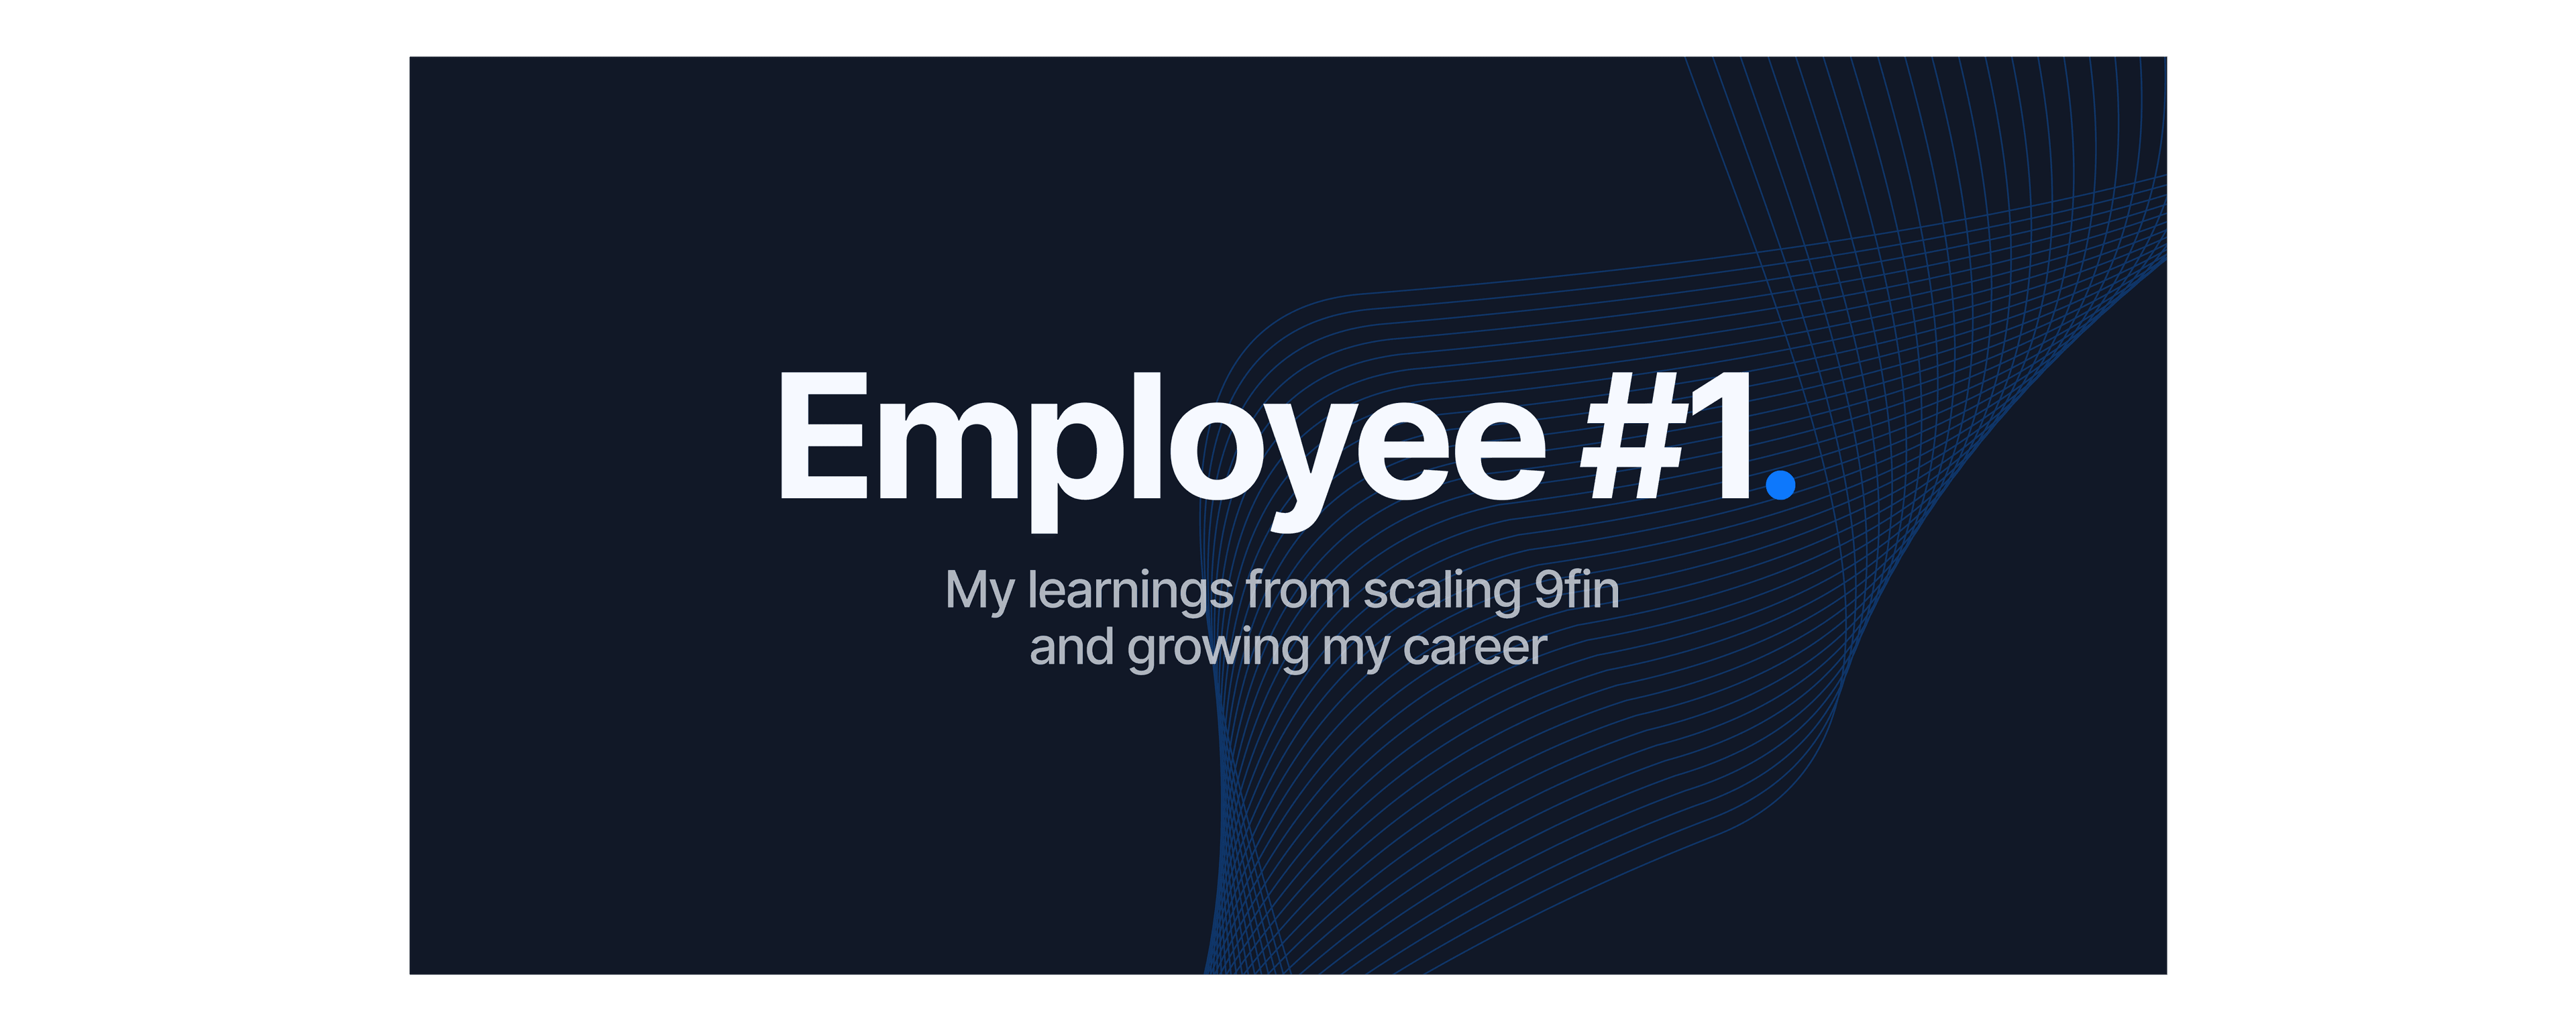 Employee #1 – My learnings from scaling 9fin and growing my career